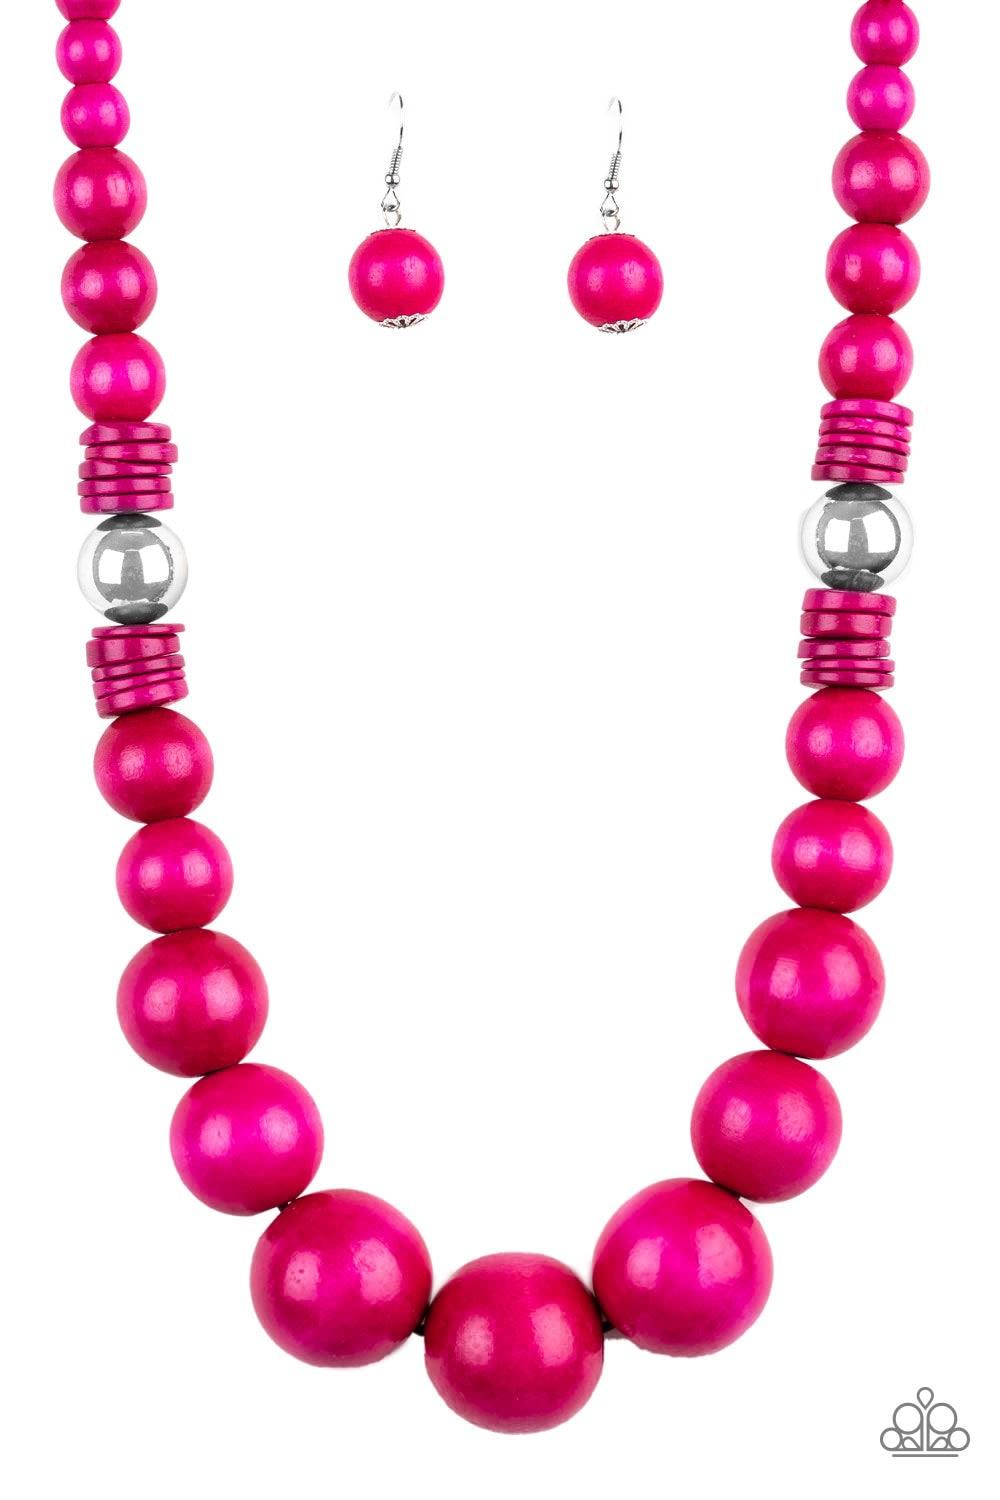 Paparazzi Accessories Panama Panorama - Pink Infused with dramatic silver beads, an array of vivacious pink wooden beads drape across the chest for a summery look. Features a button-loop closure. Jewelry